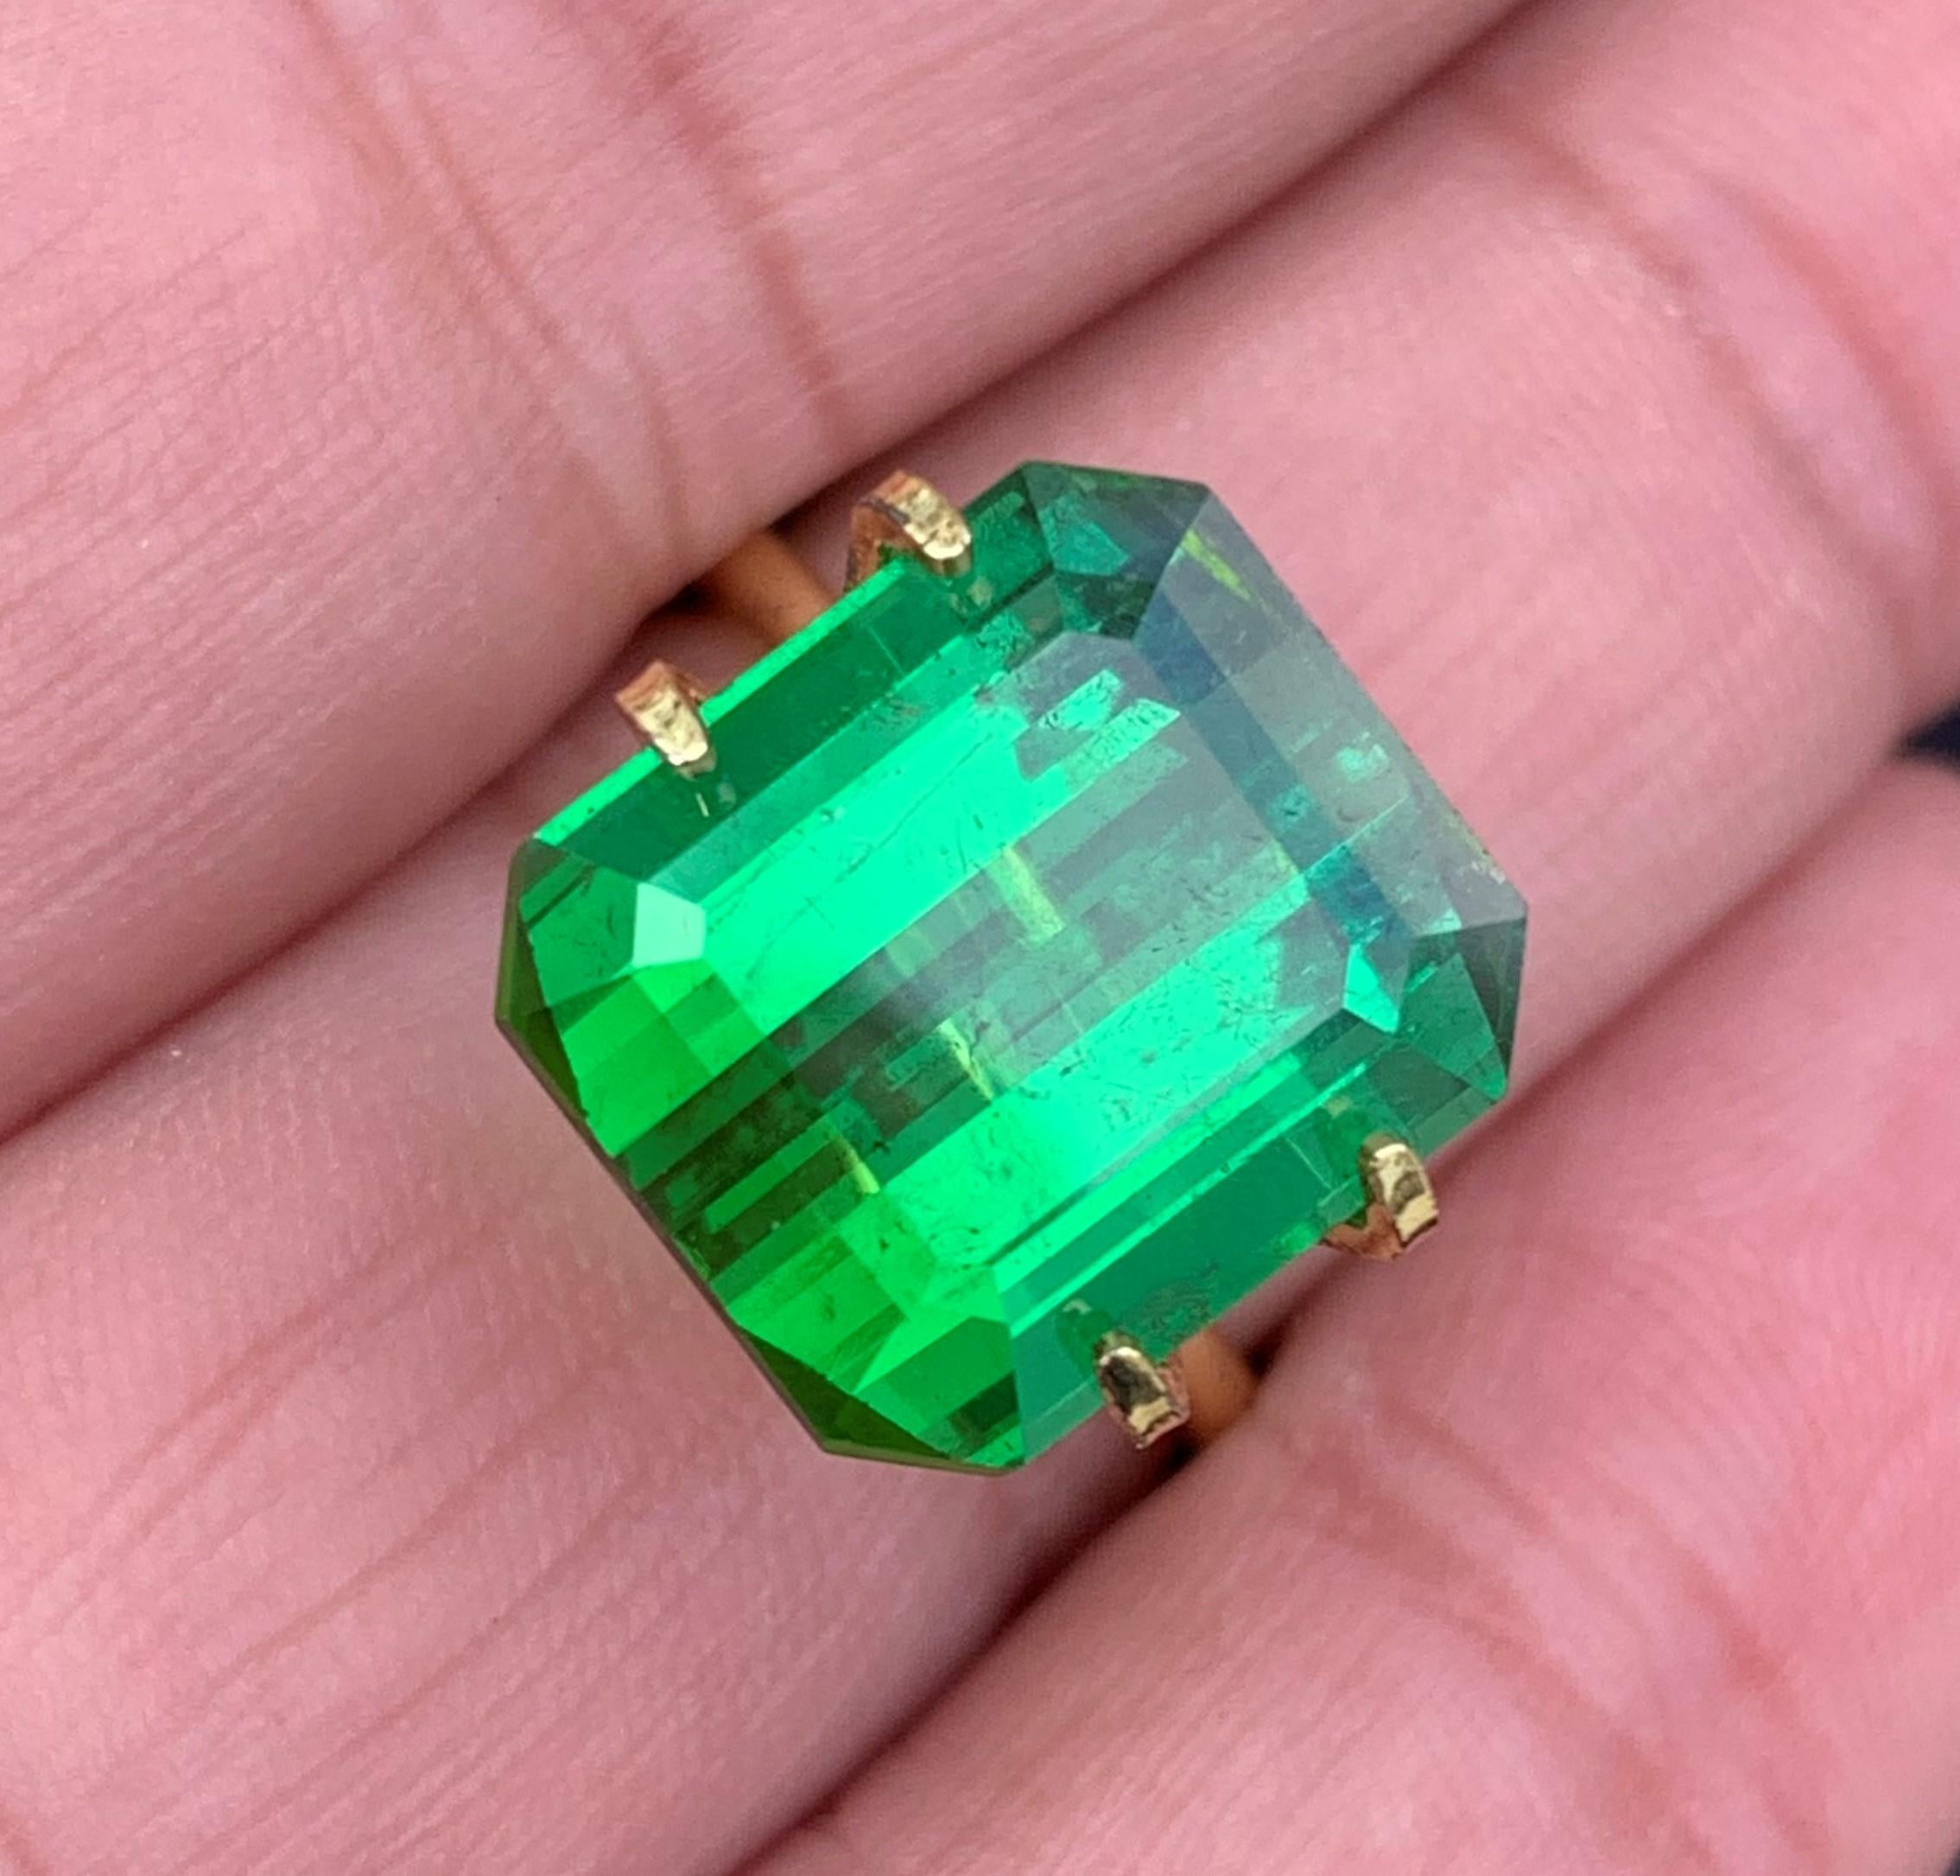 Faceted Tourmaline
Weight: 11.30 Carats
Dimension: 12.8x11.4x8.6 Mm
Origin: Kunar Afghanistan Mine
Shape: Emerald 
Color: Green
Quality: SI
Certificate: On Demand
Green Tourmaline moves healing energy throughout the body, bringing a sense of